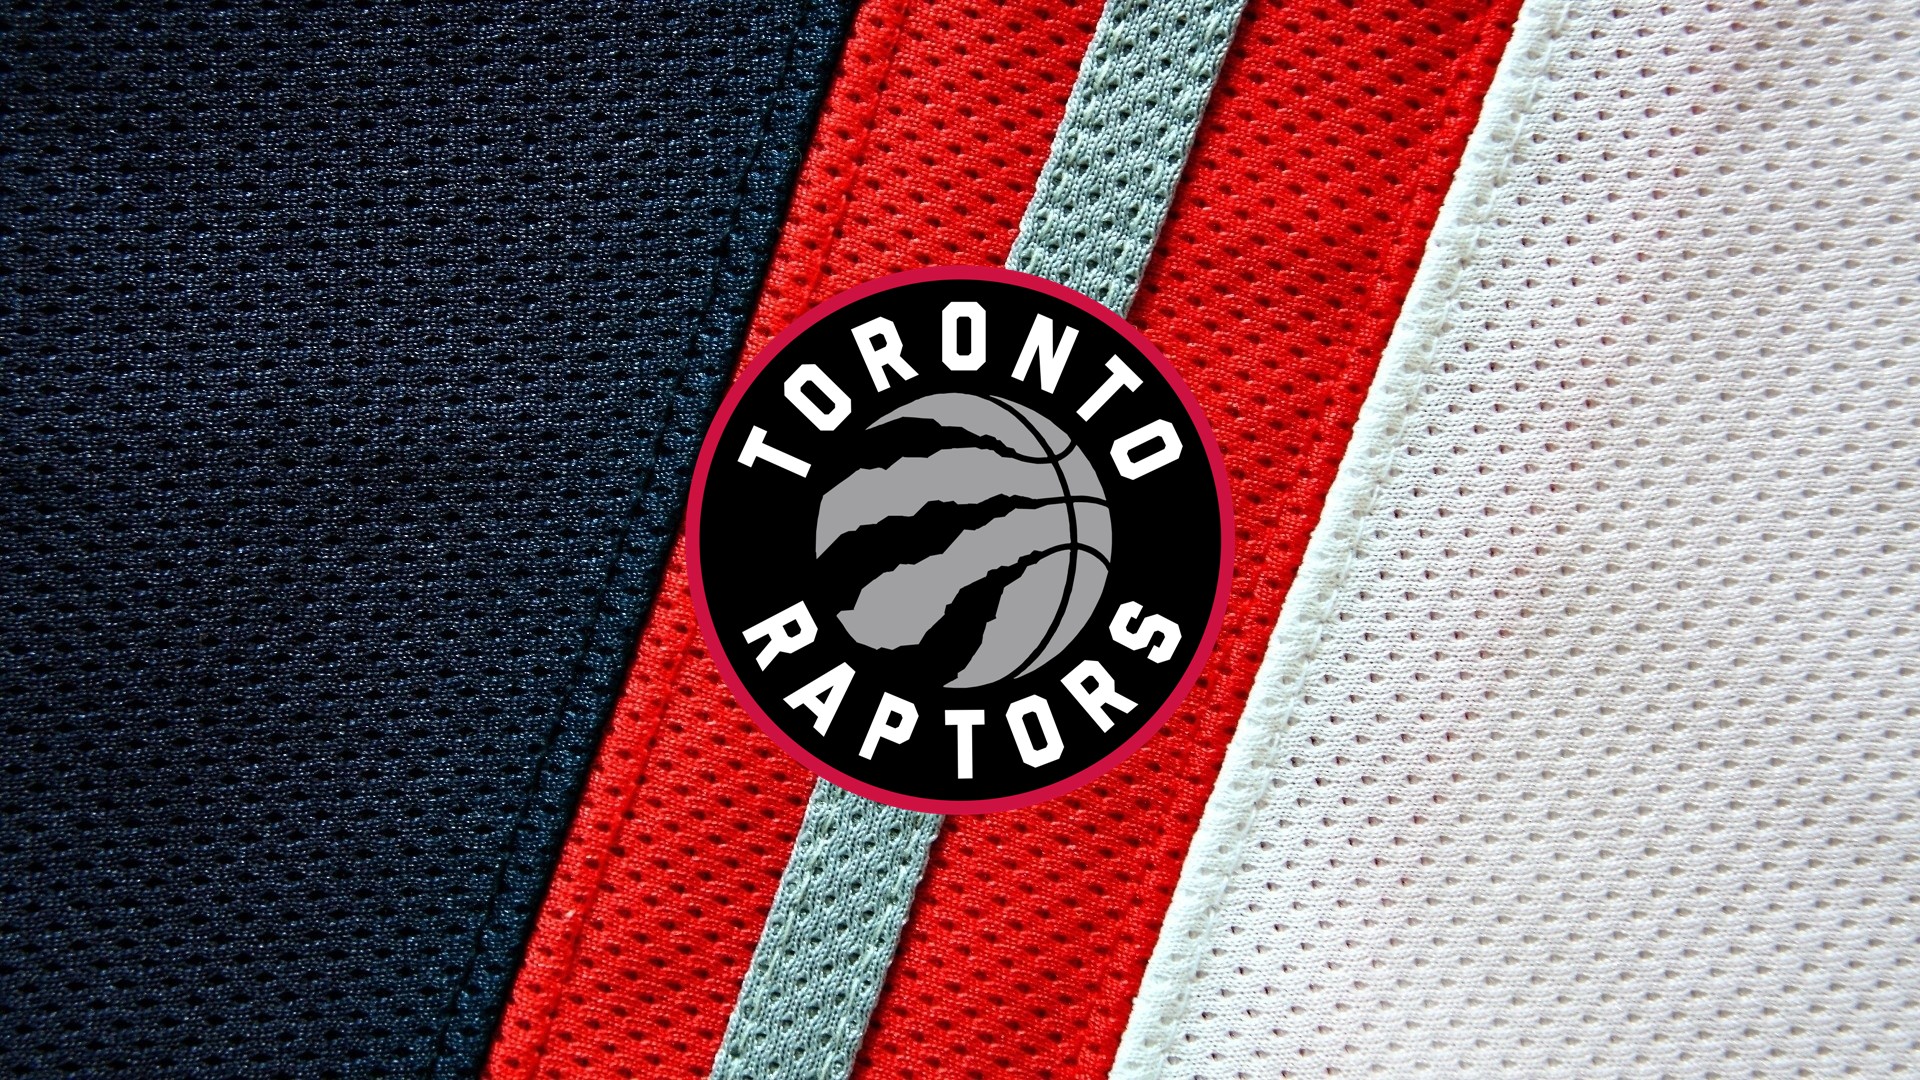 Wallpapers Computer Toronto Raptors with image resolution 1920x1080 pixel. You can make this wallpaper for your Desktop Computer Backgrounds, Mac Wallpapers, Android Lock screen or iPhone Screensavers